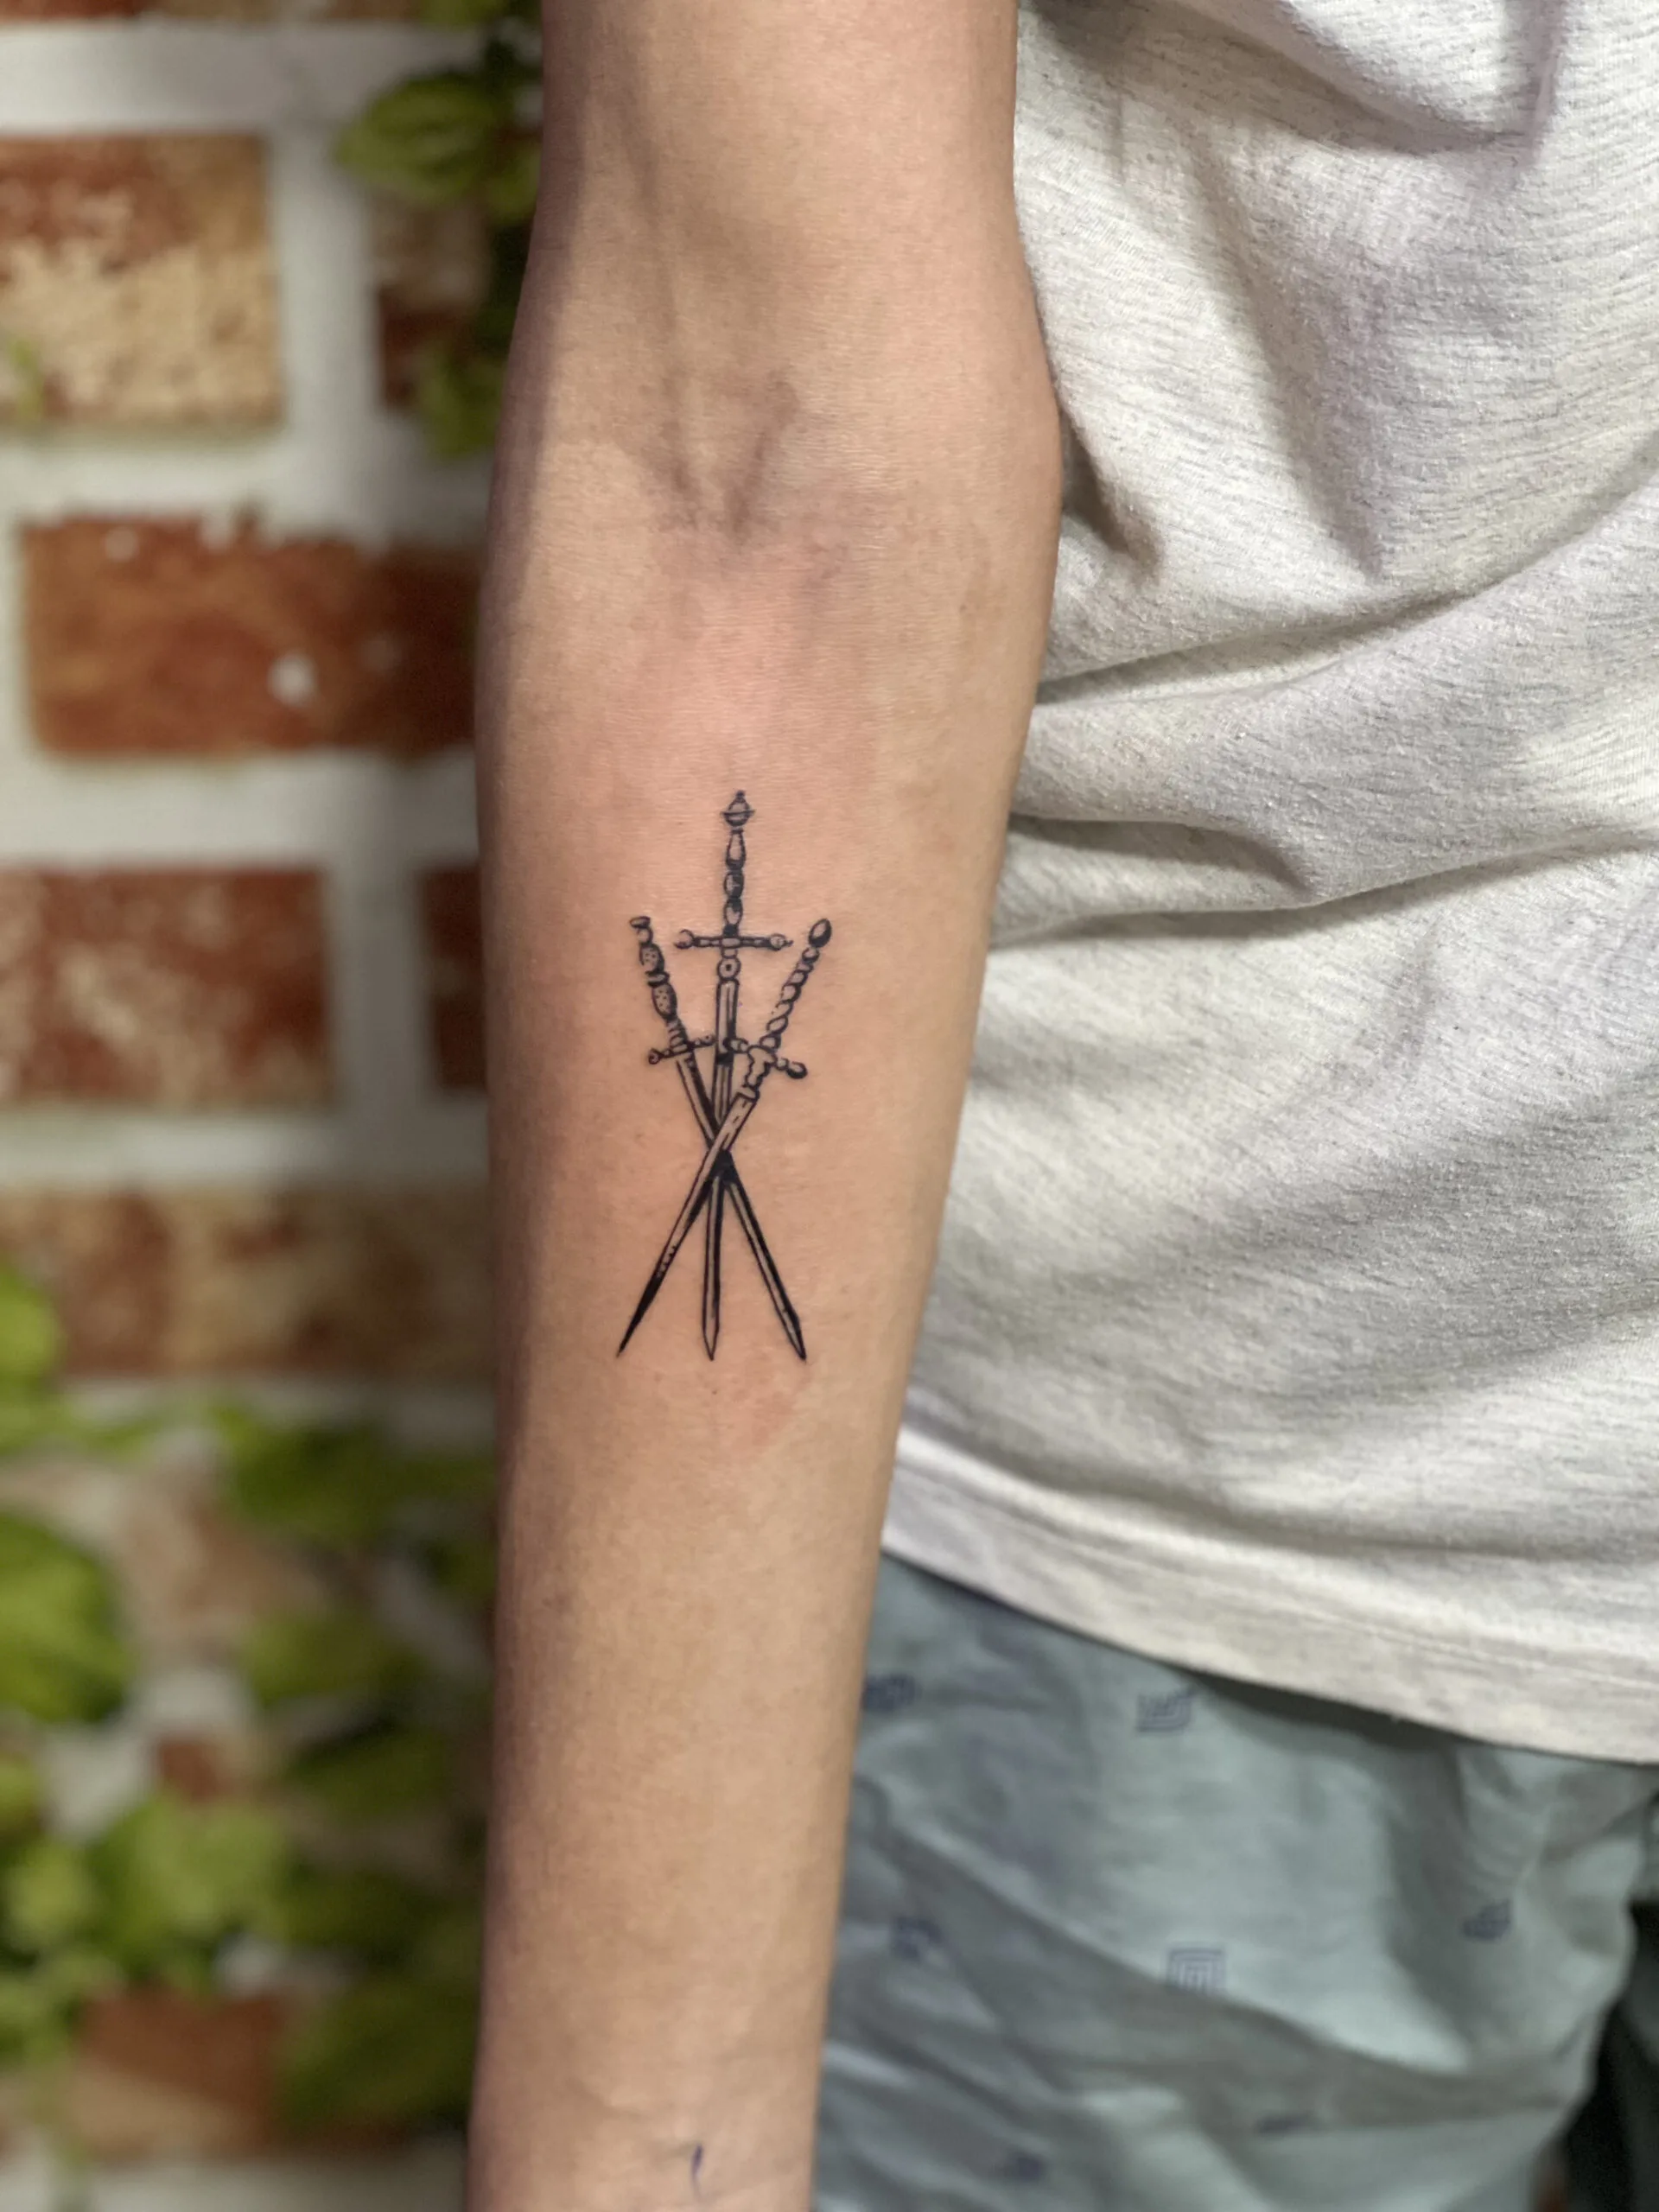 Three Swords Tattoo Meaning: A Symbol of Strength, Courage, and Honor